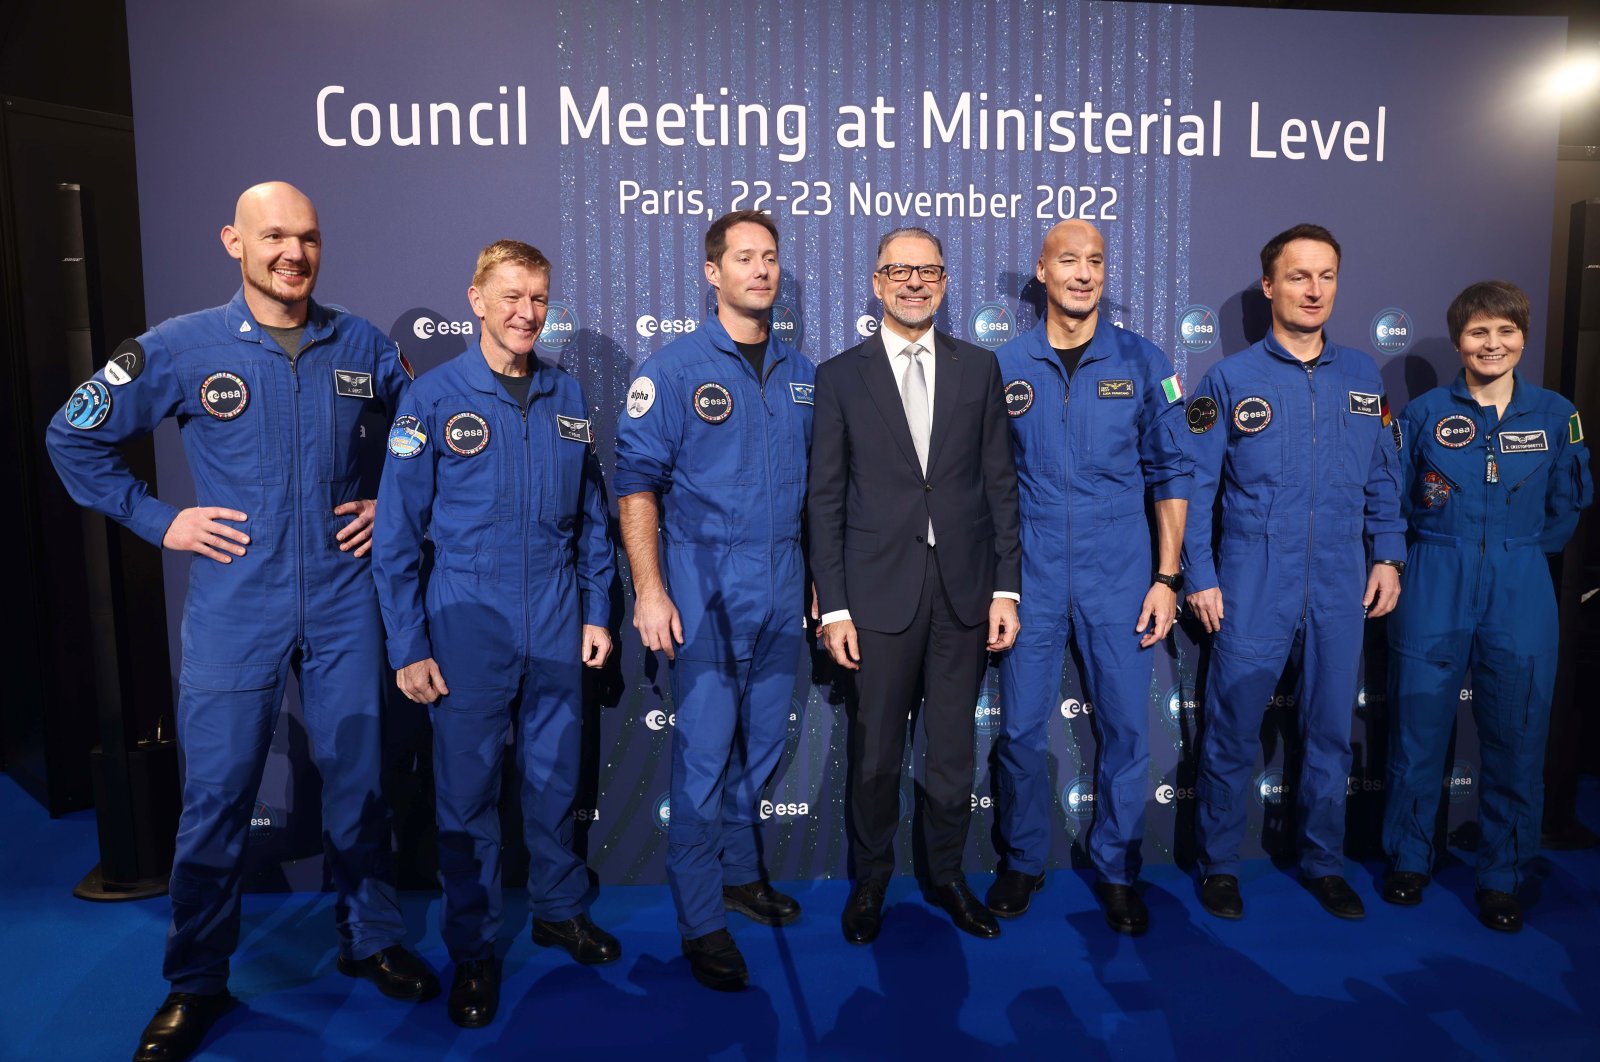 European Space Agency (ESA) General Director Josef Aschbacher (C) poses for a photograph with agency&#039;s astronauts prior an ESA Council Meeting in Paris, France, Nov., 22, 2022. (EPA Photo)